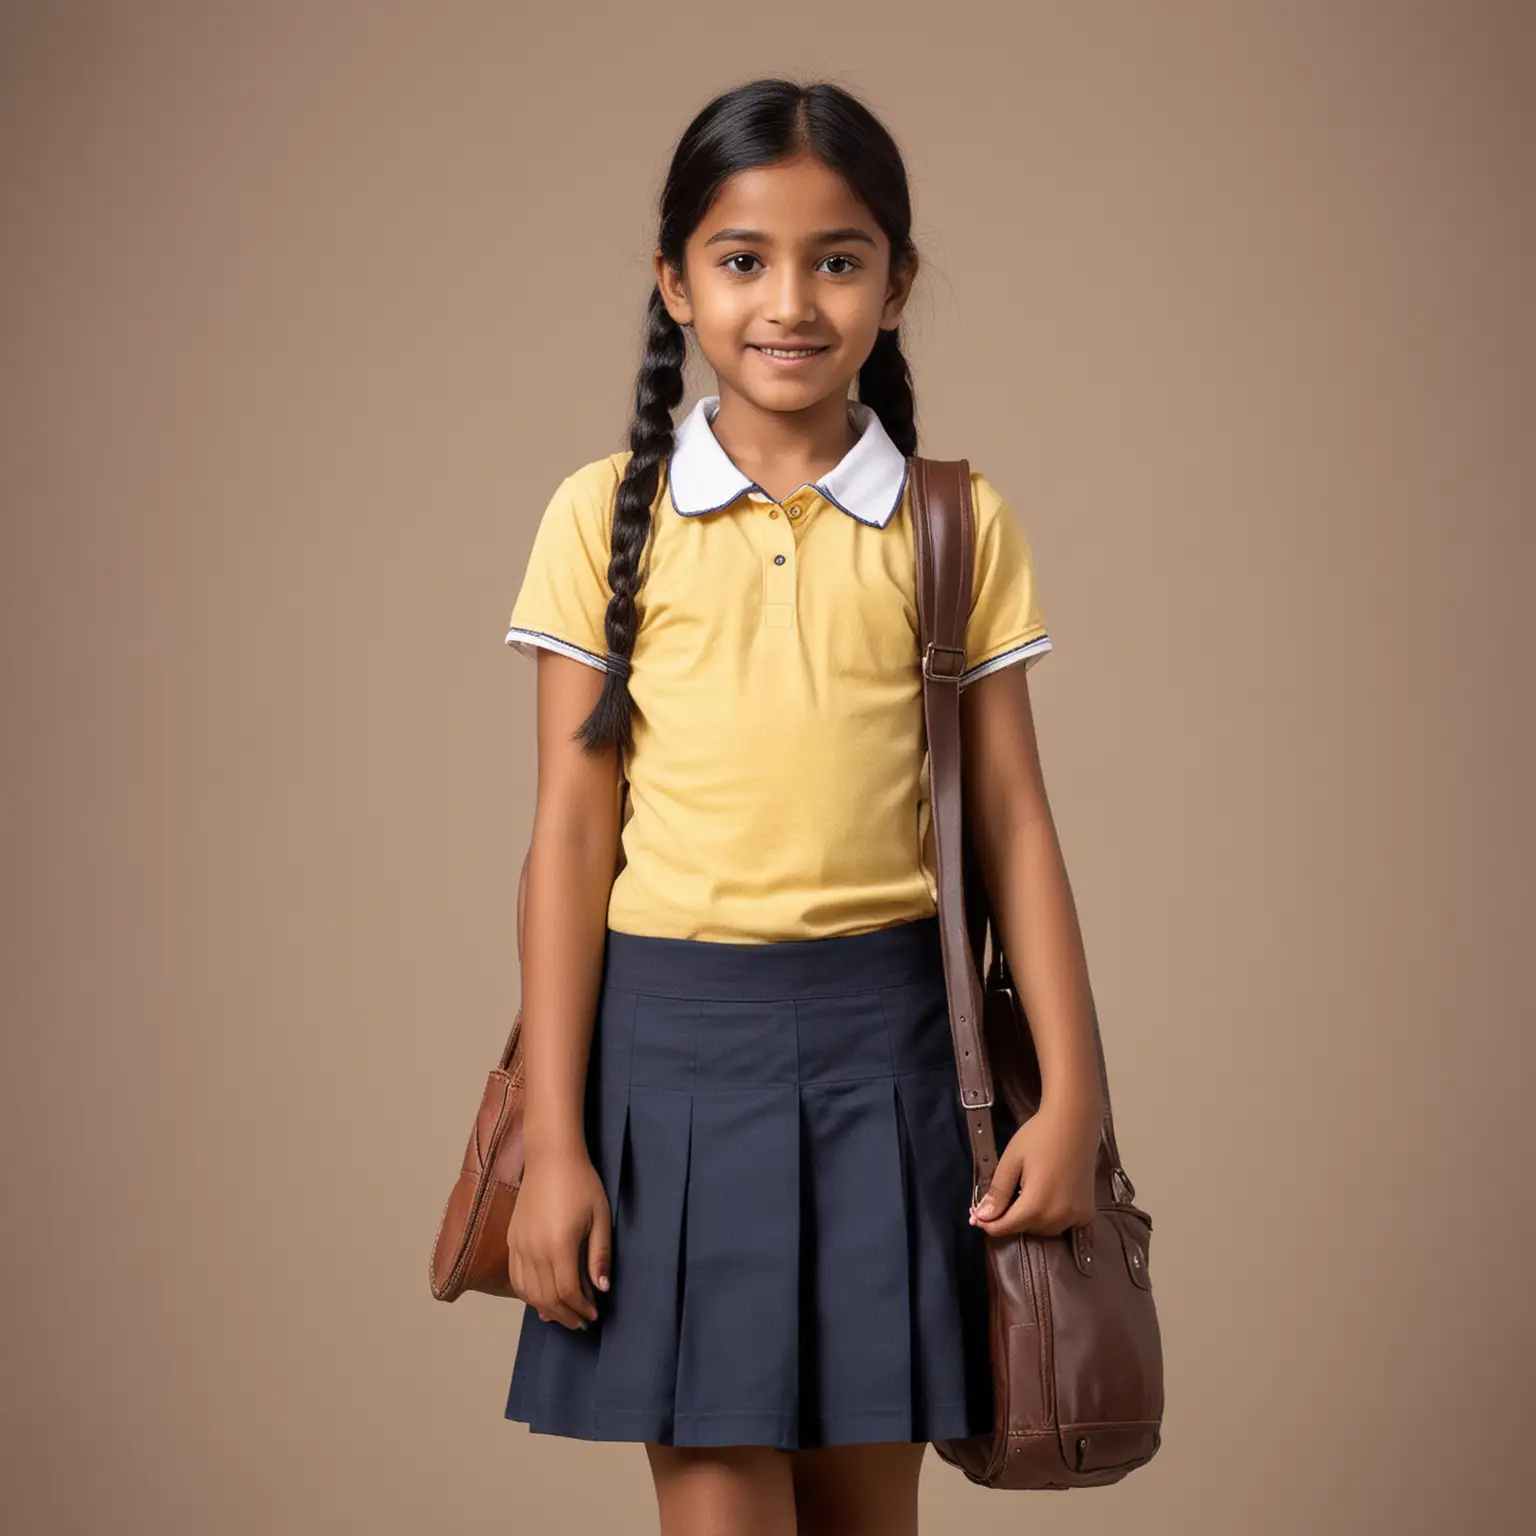 Indian school girl with bag standing